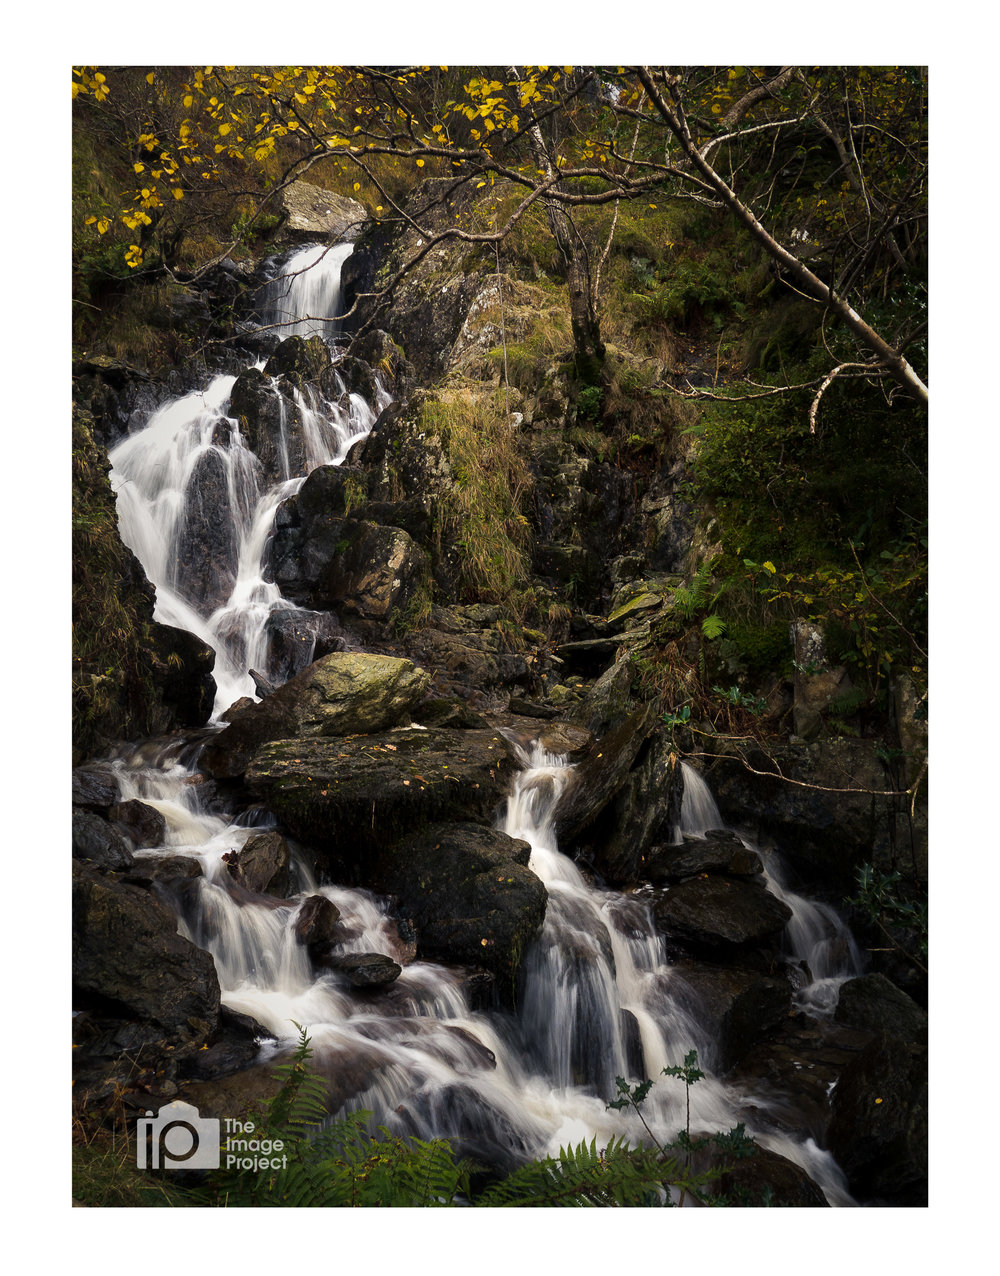 Small falls near Brotherswater in autumn